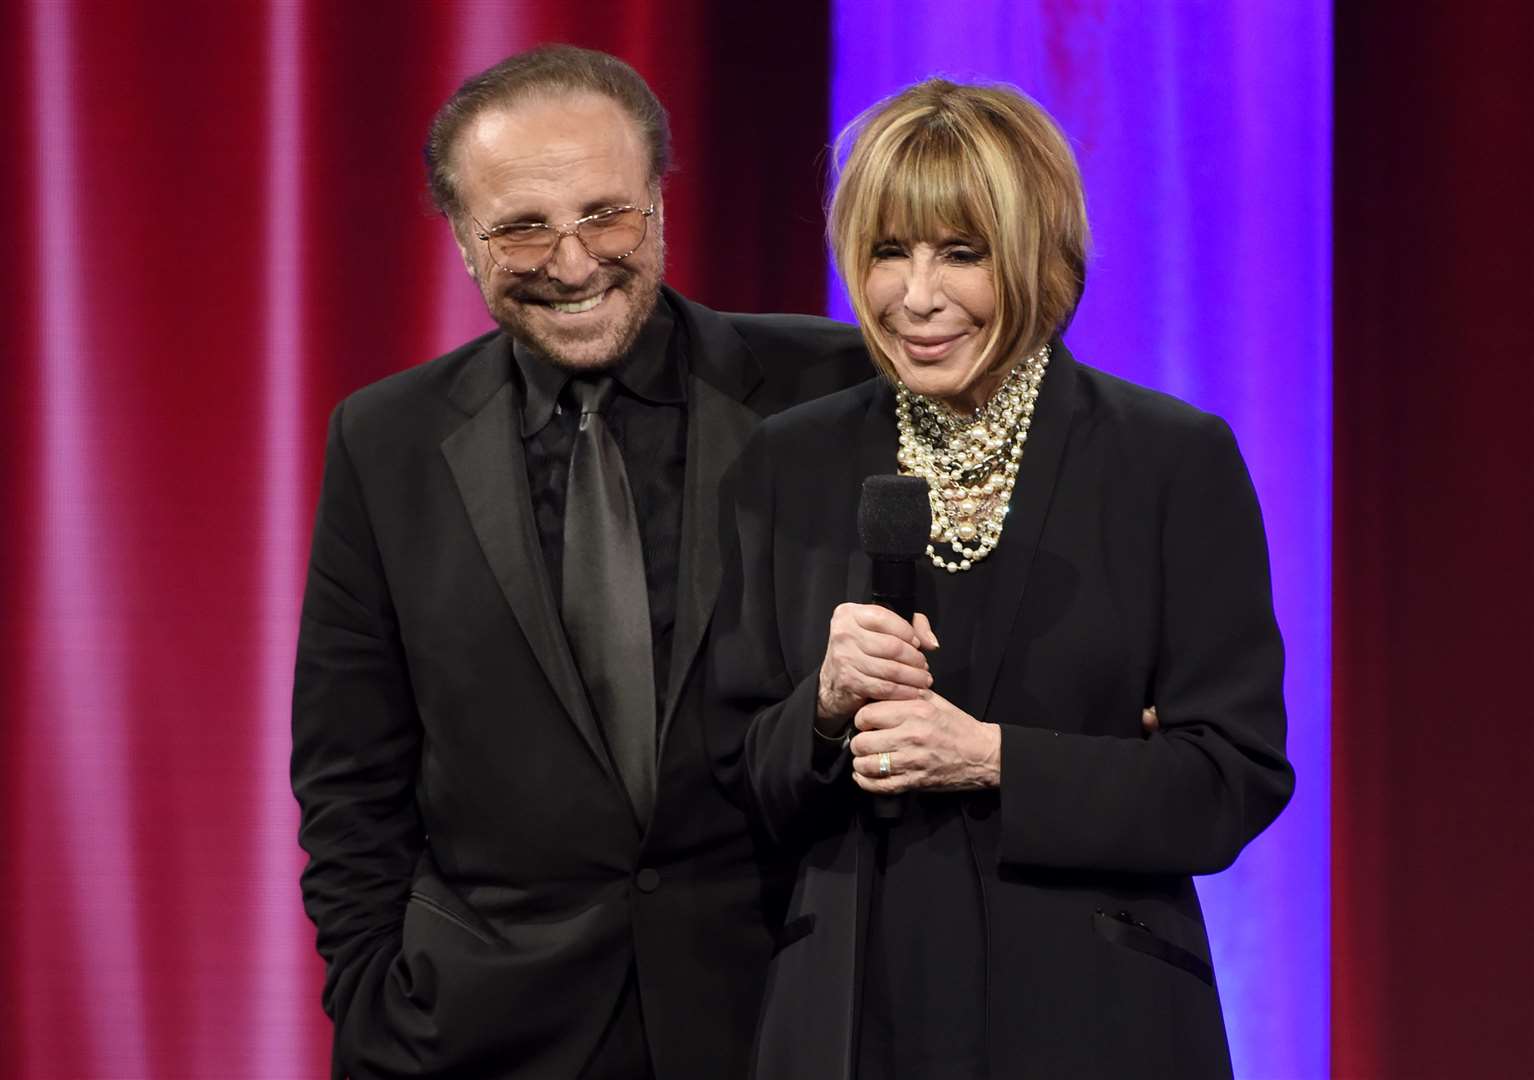 Barry Mann, left, and Cynthia Weil accept the BMI Icon award at the 64th annual BMI Pop Awards (Photo by Chris Pizzello/Invision/AP, File)